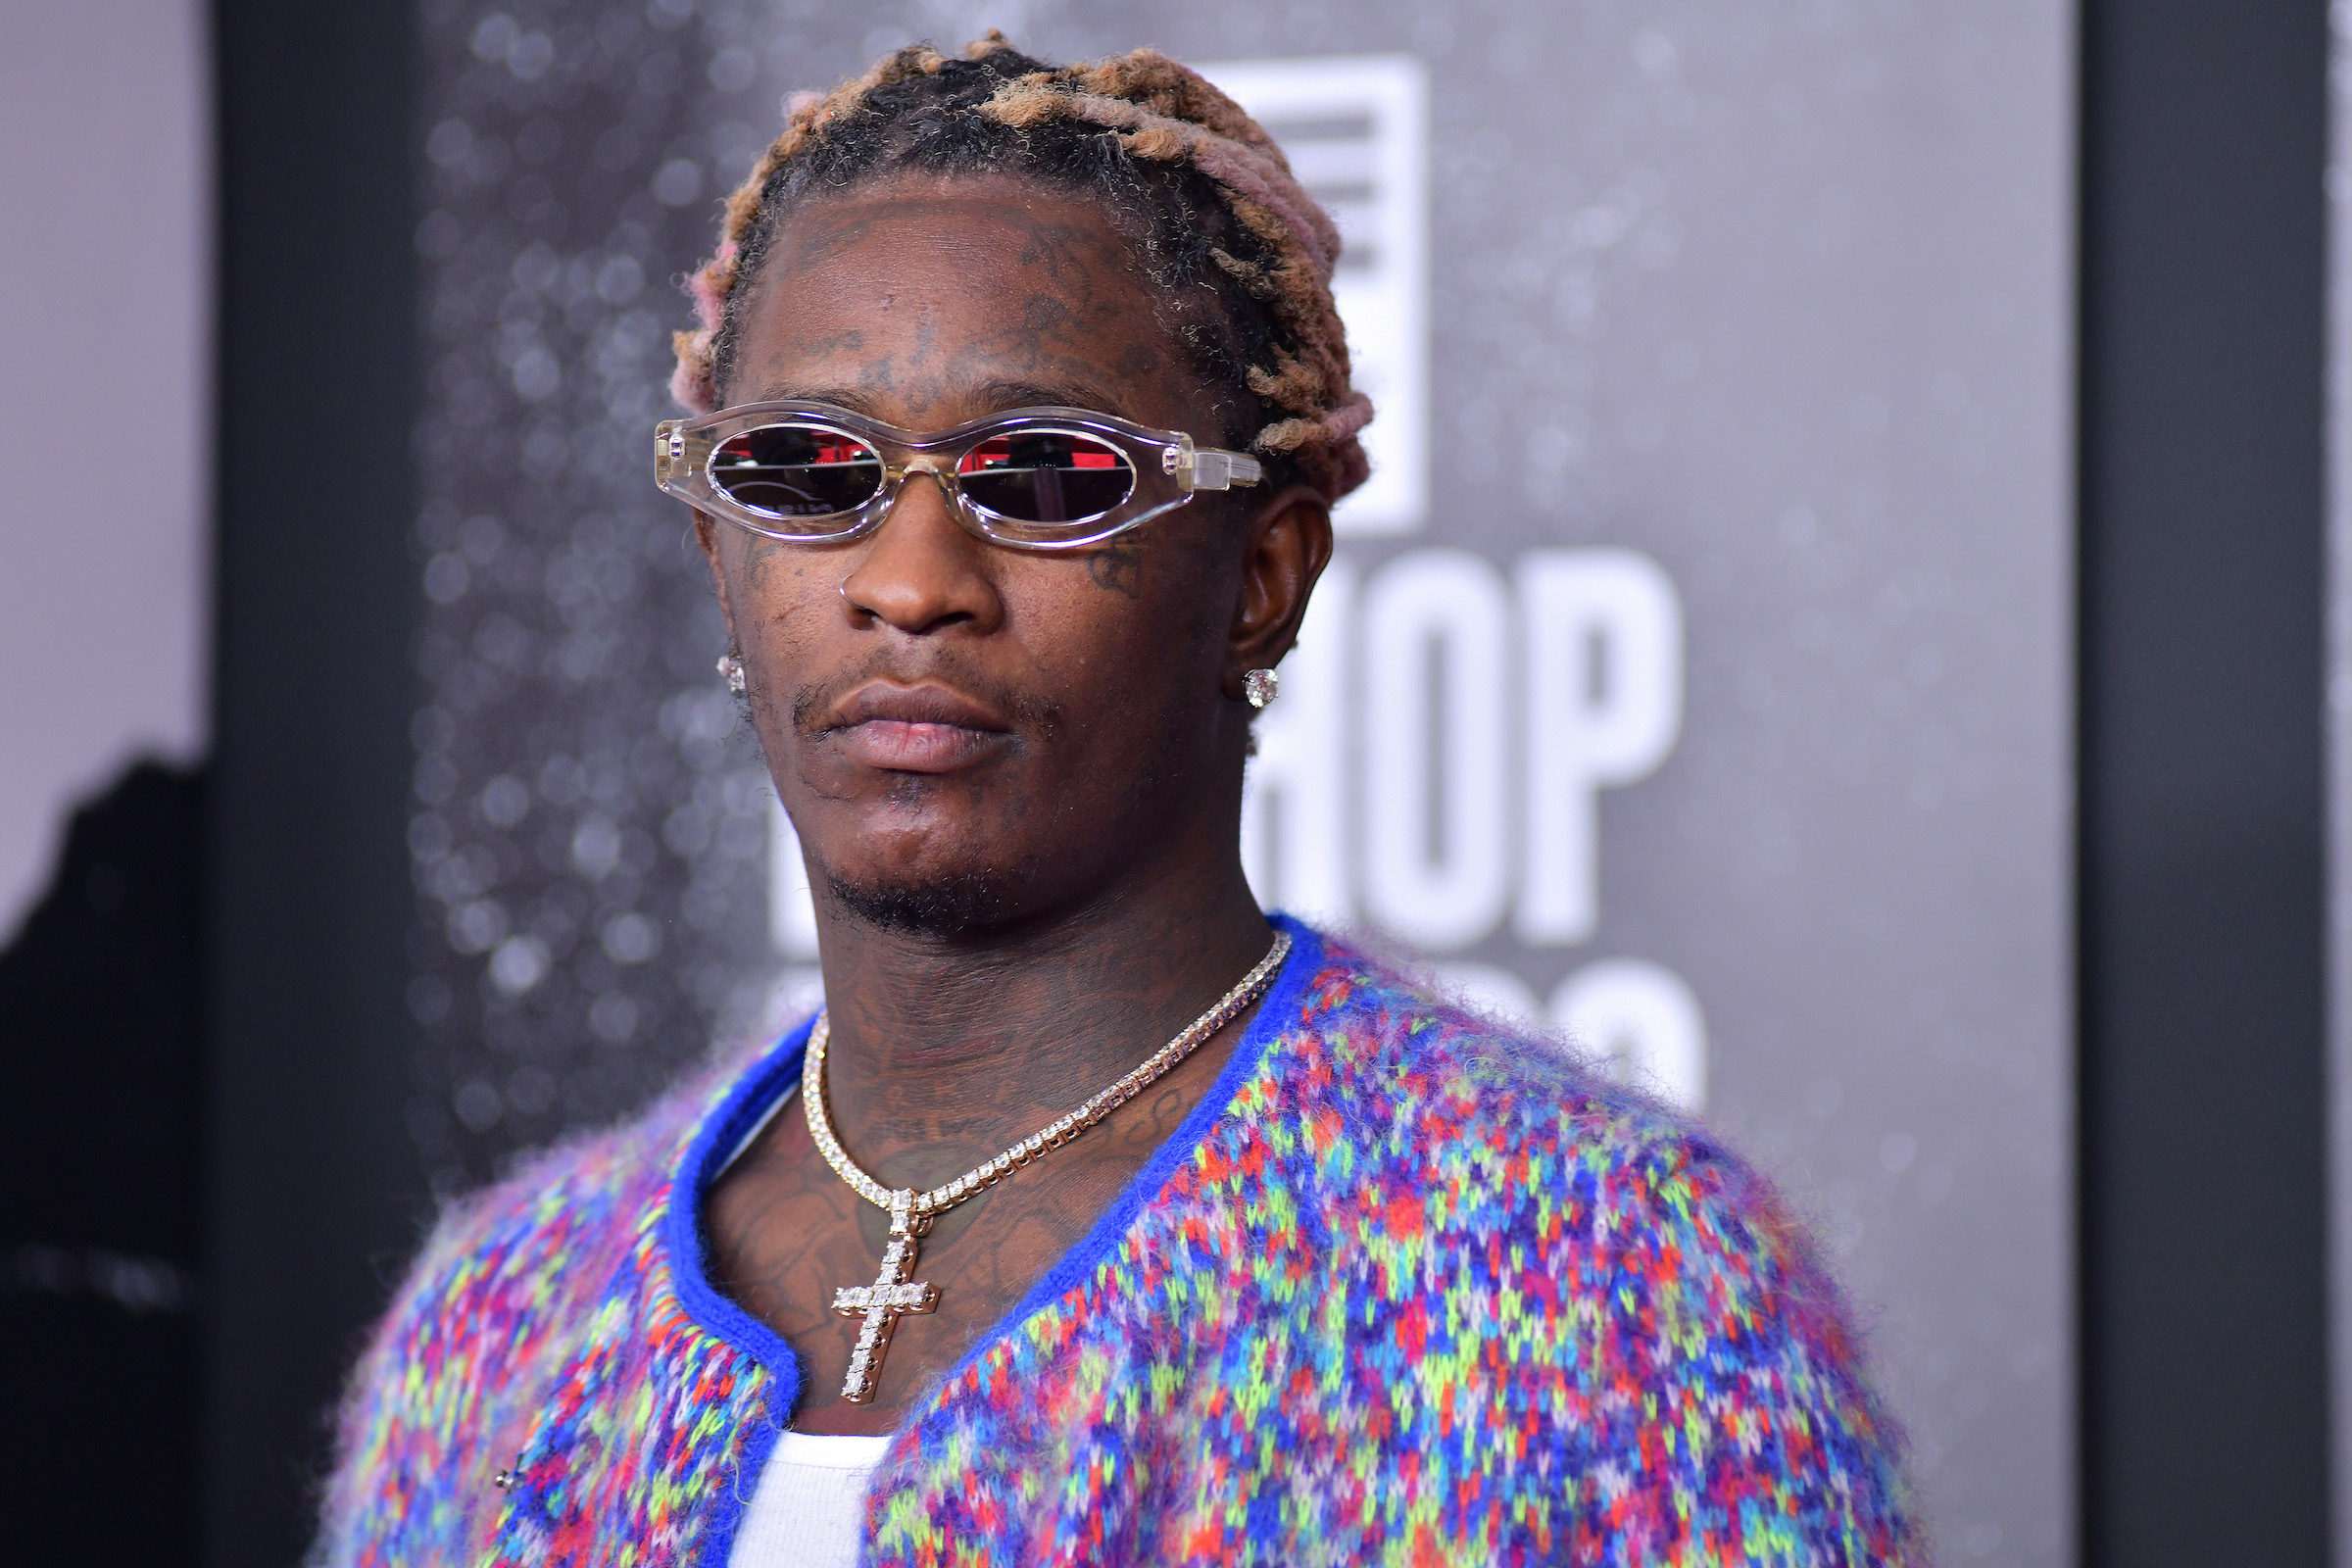 Young Thug wearing glasses